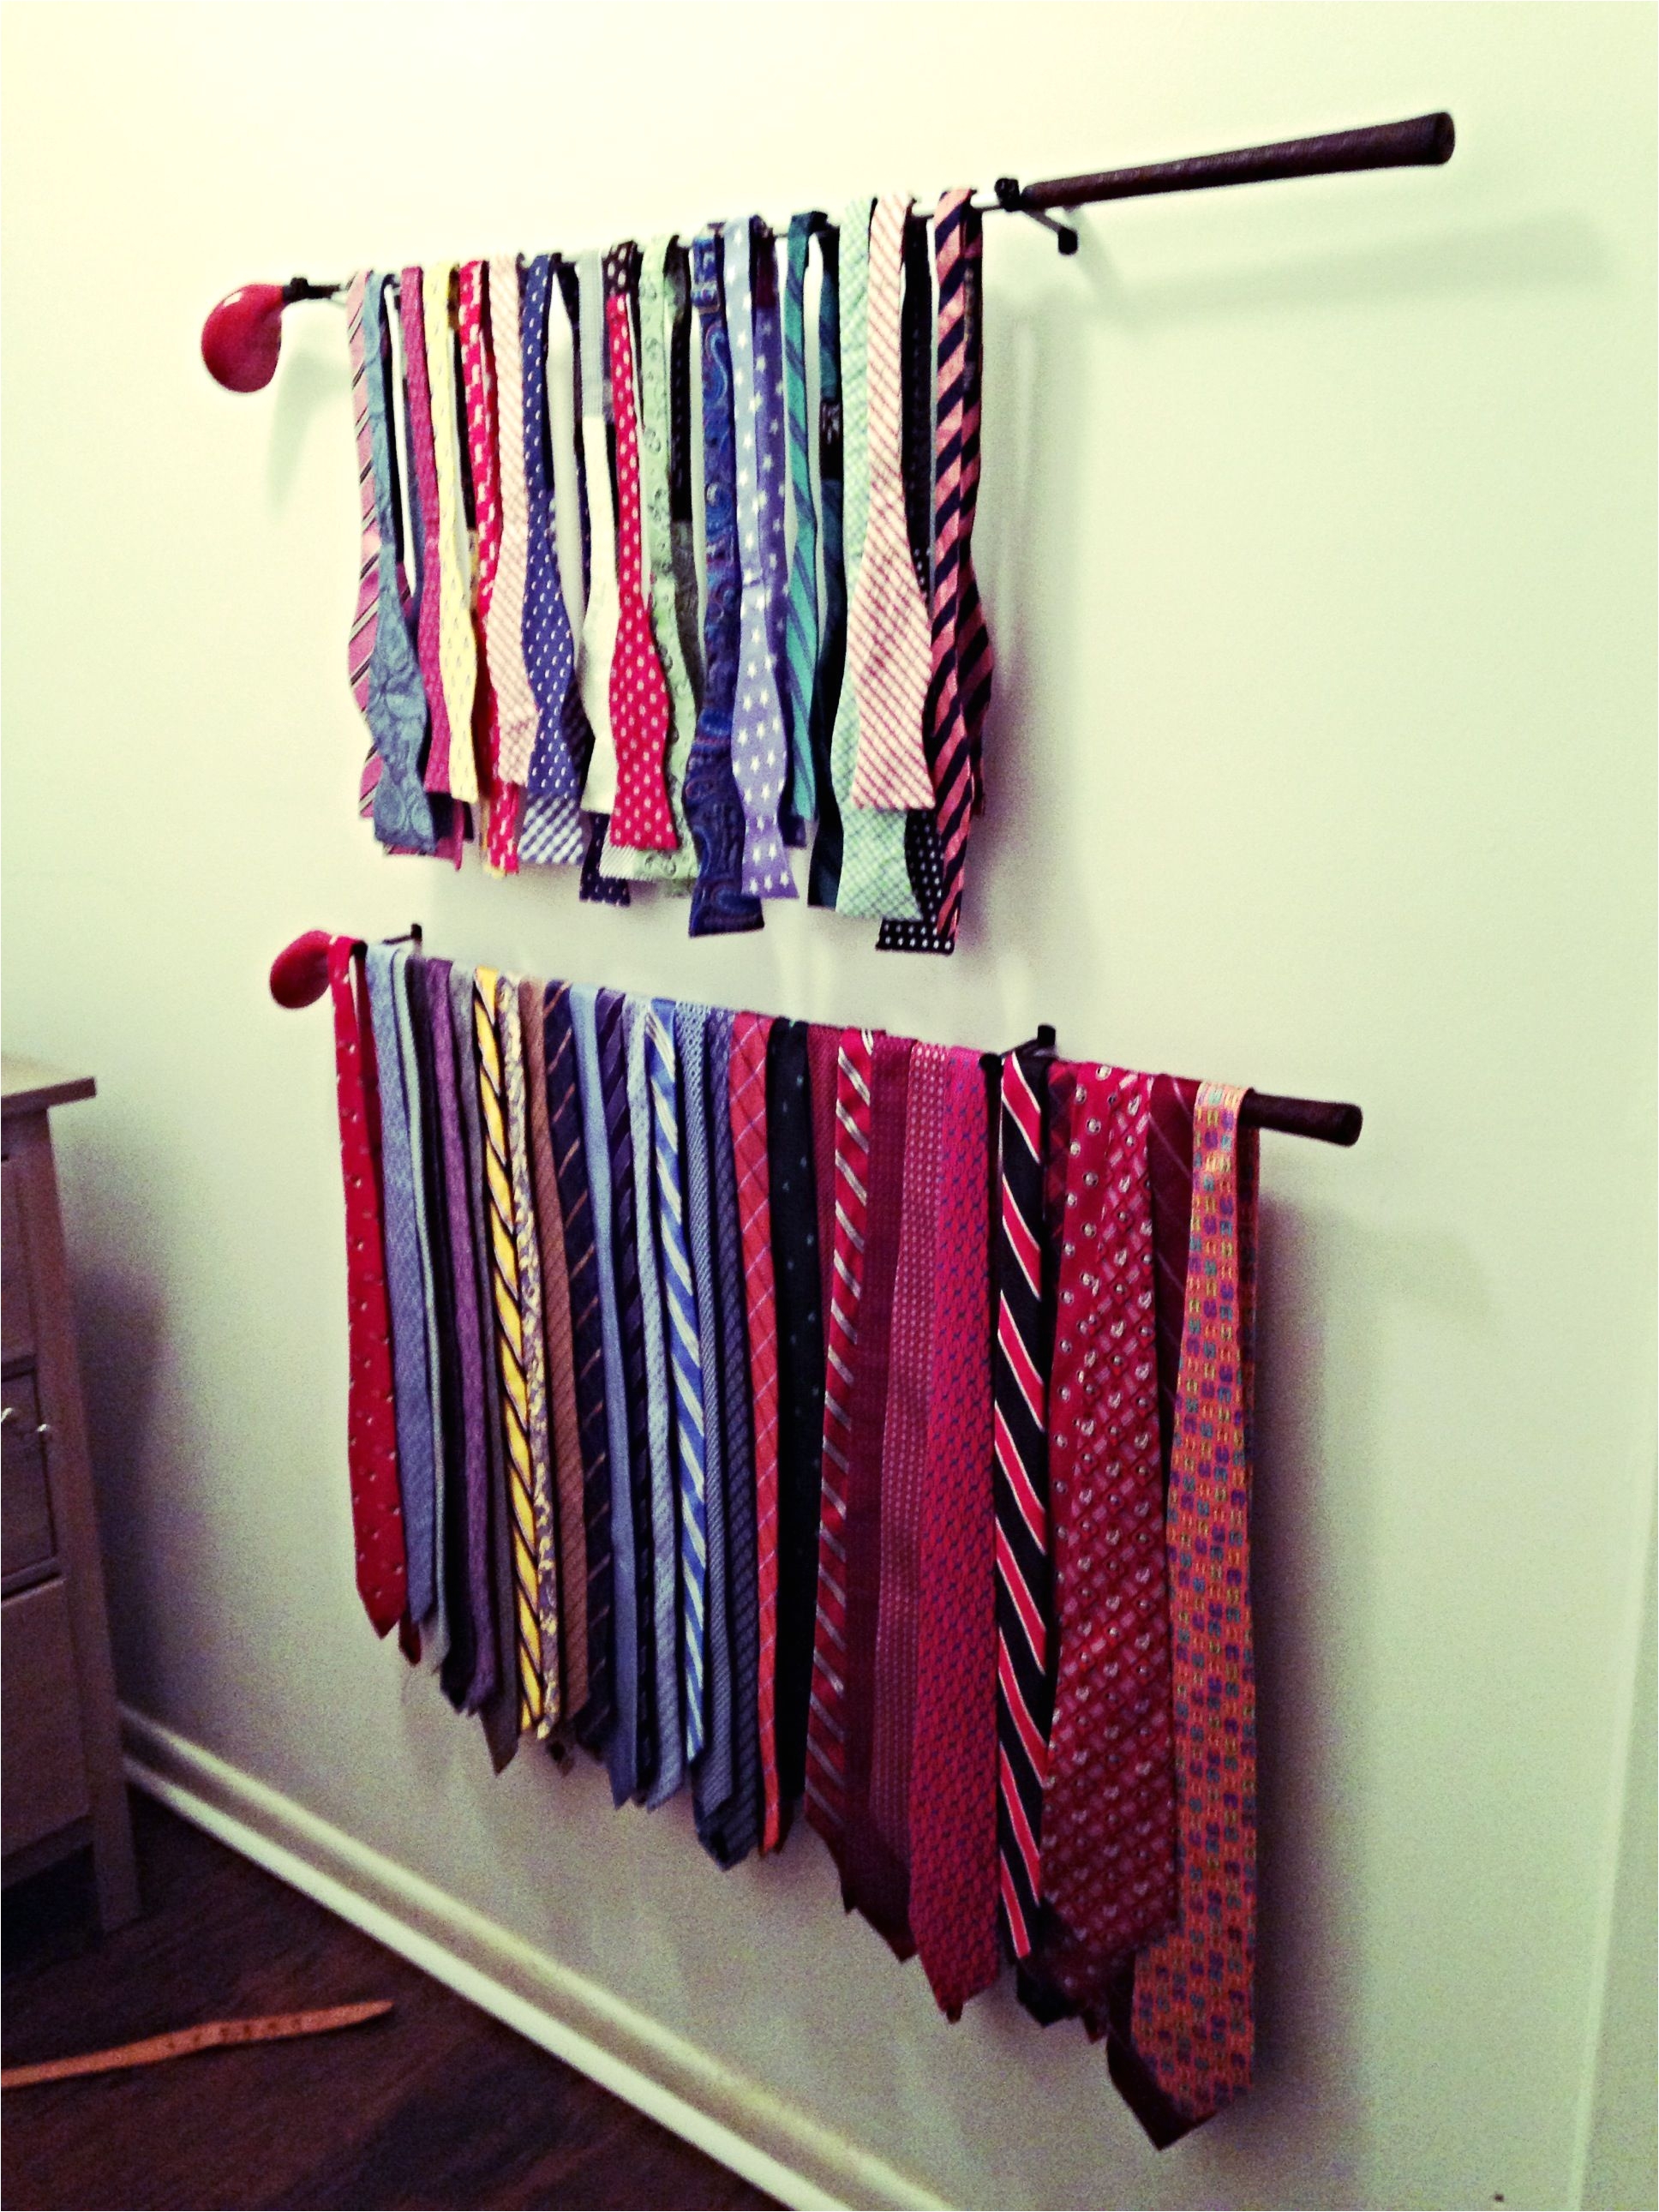 Mr Show Electric Tie Rack Jared Turned My Grandfathers Old Wooden Golf Clubs Into His New Tie